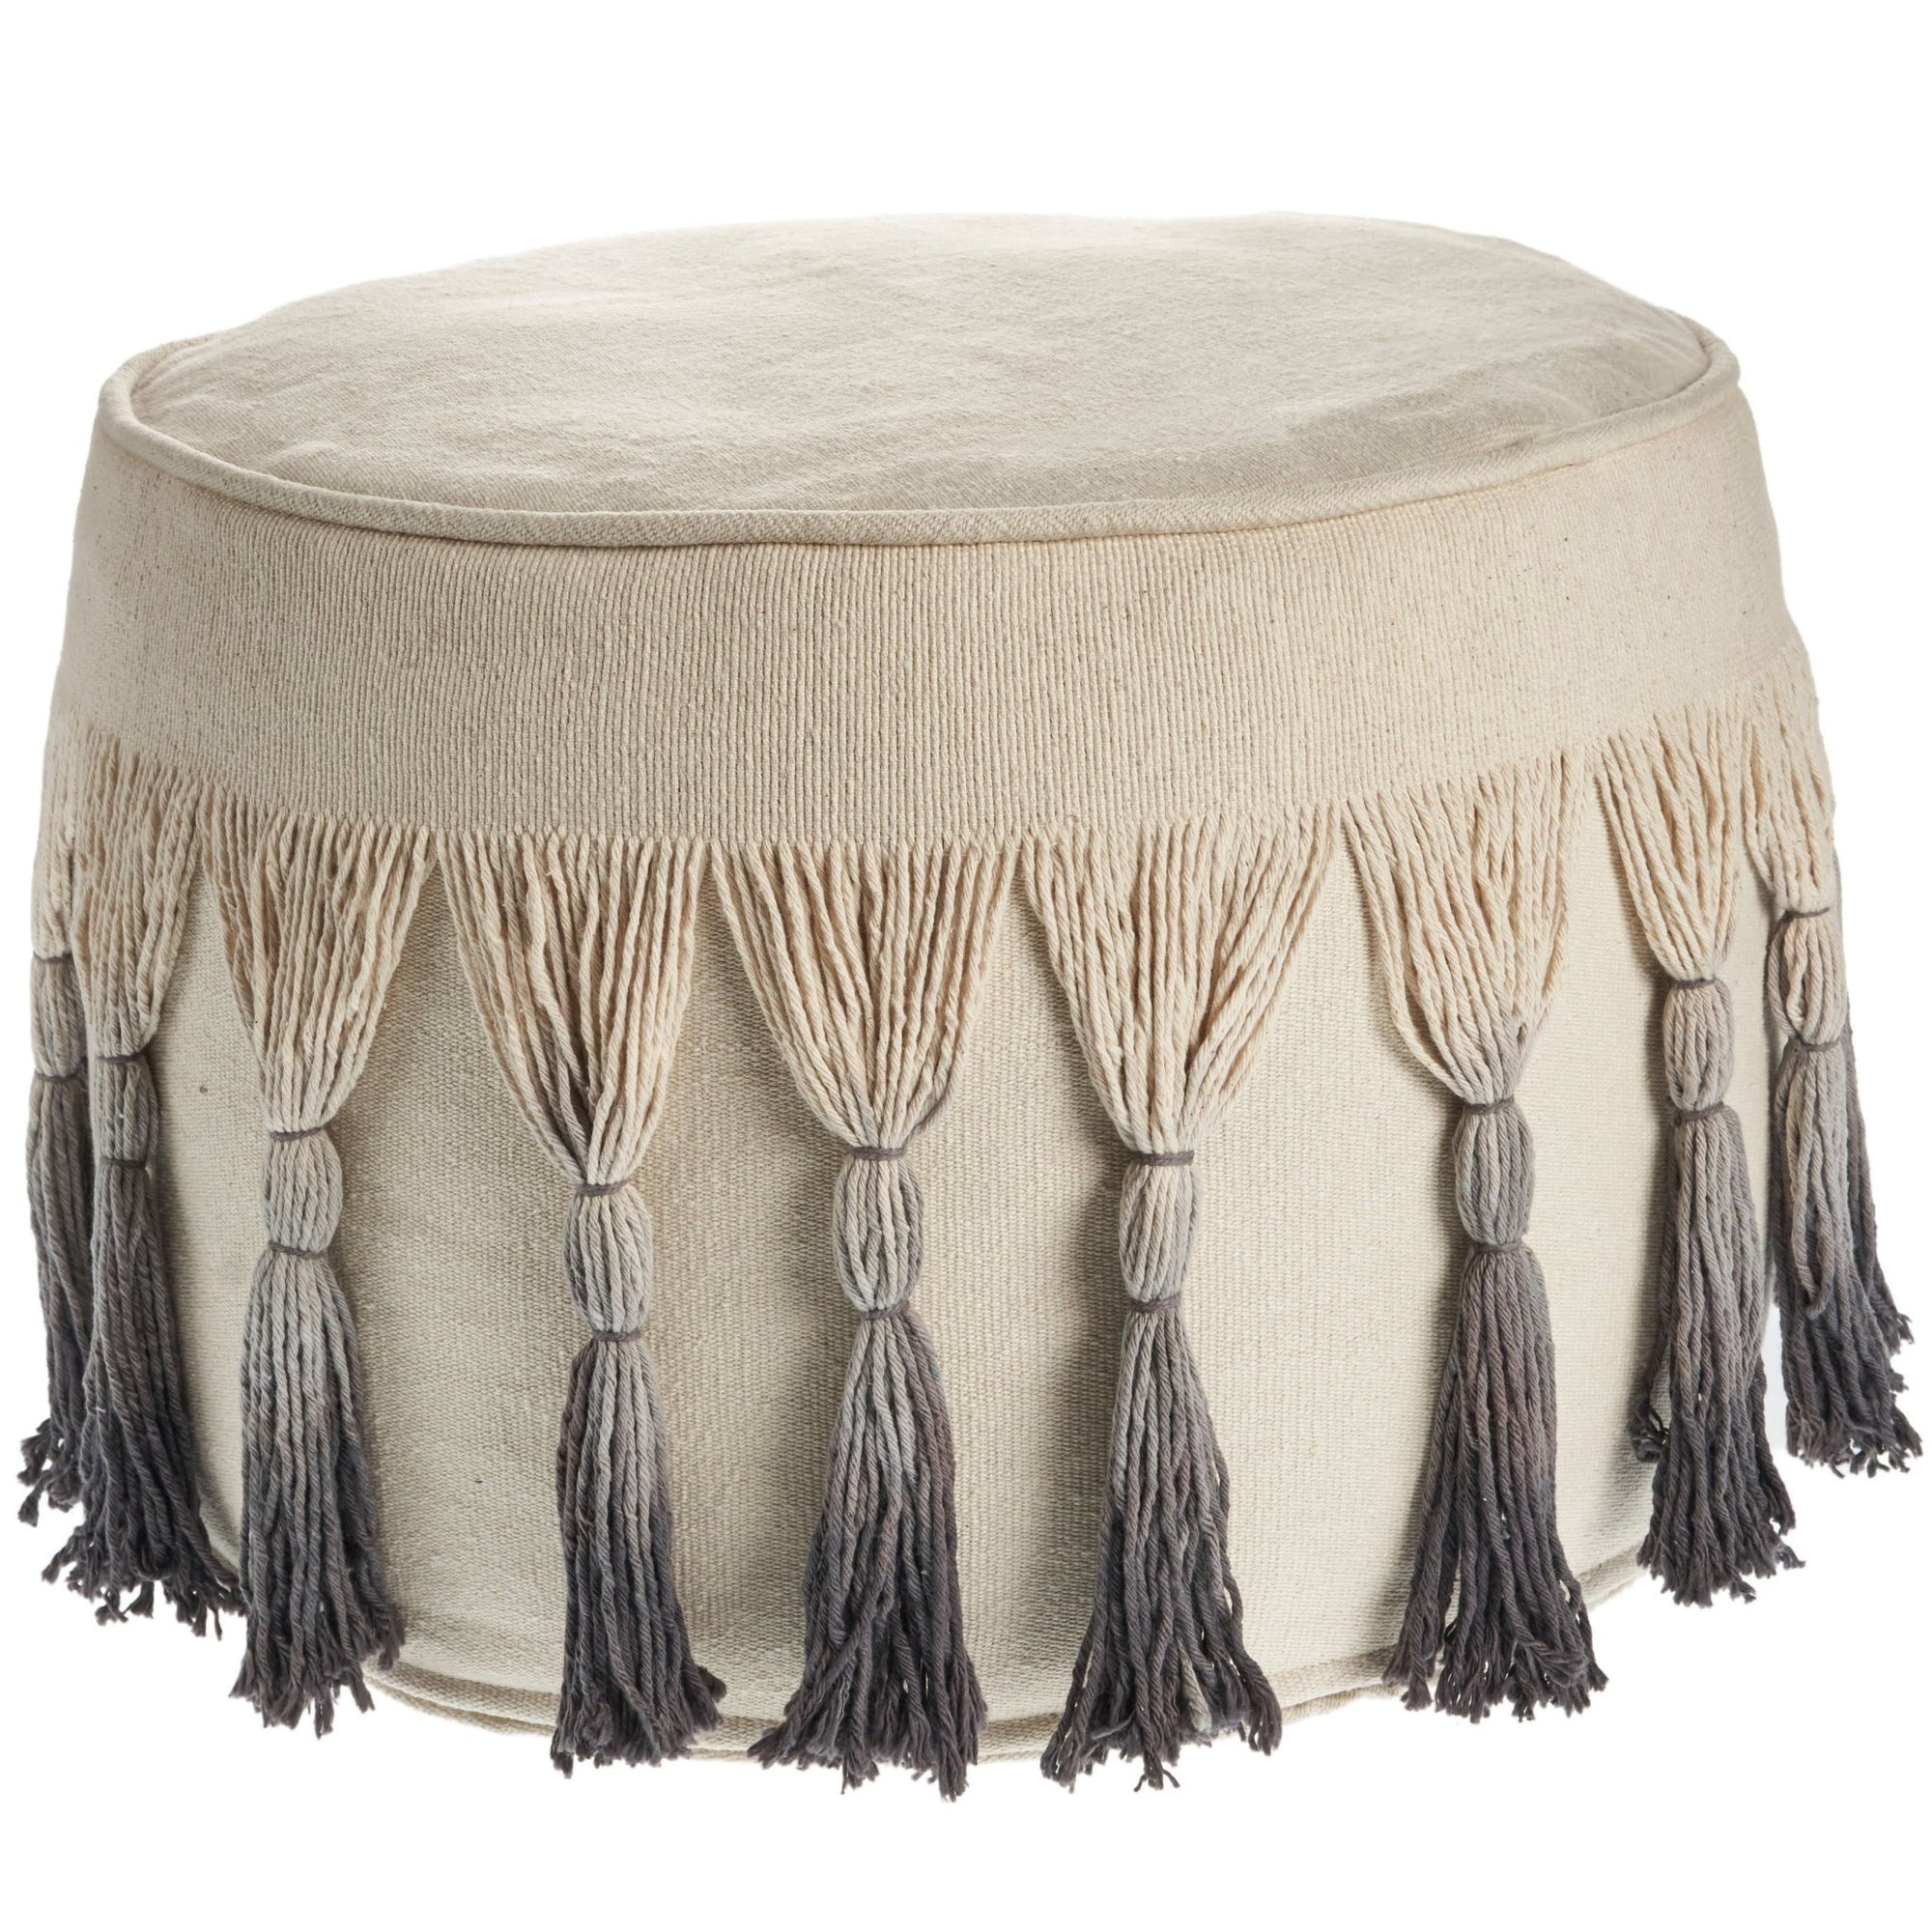 Sophisticated Ombre LR99713 Pouf - Rug & Home